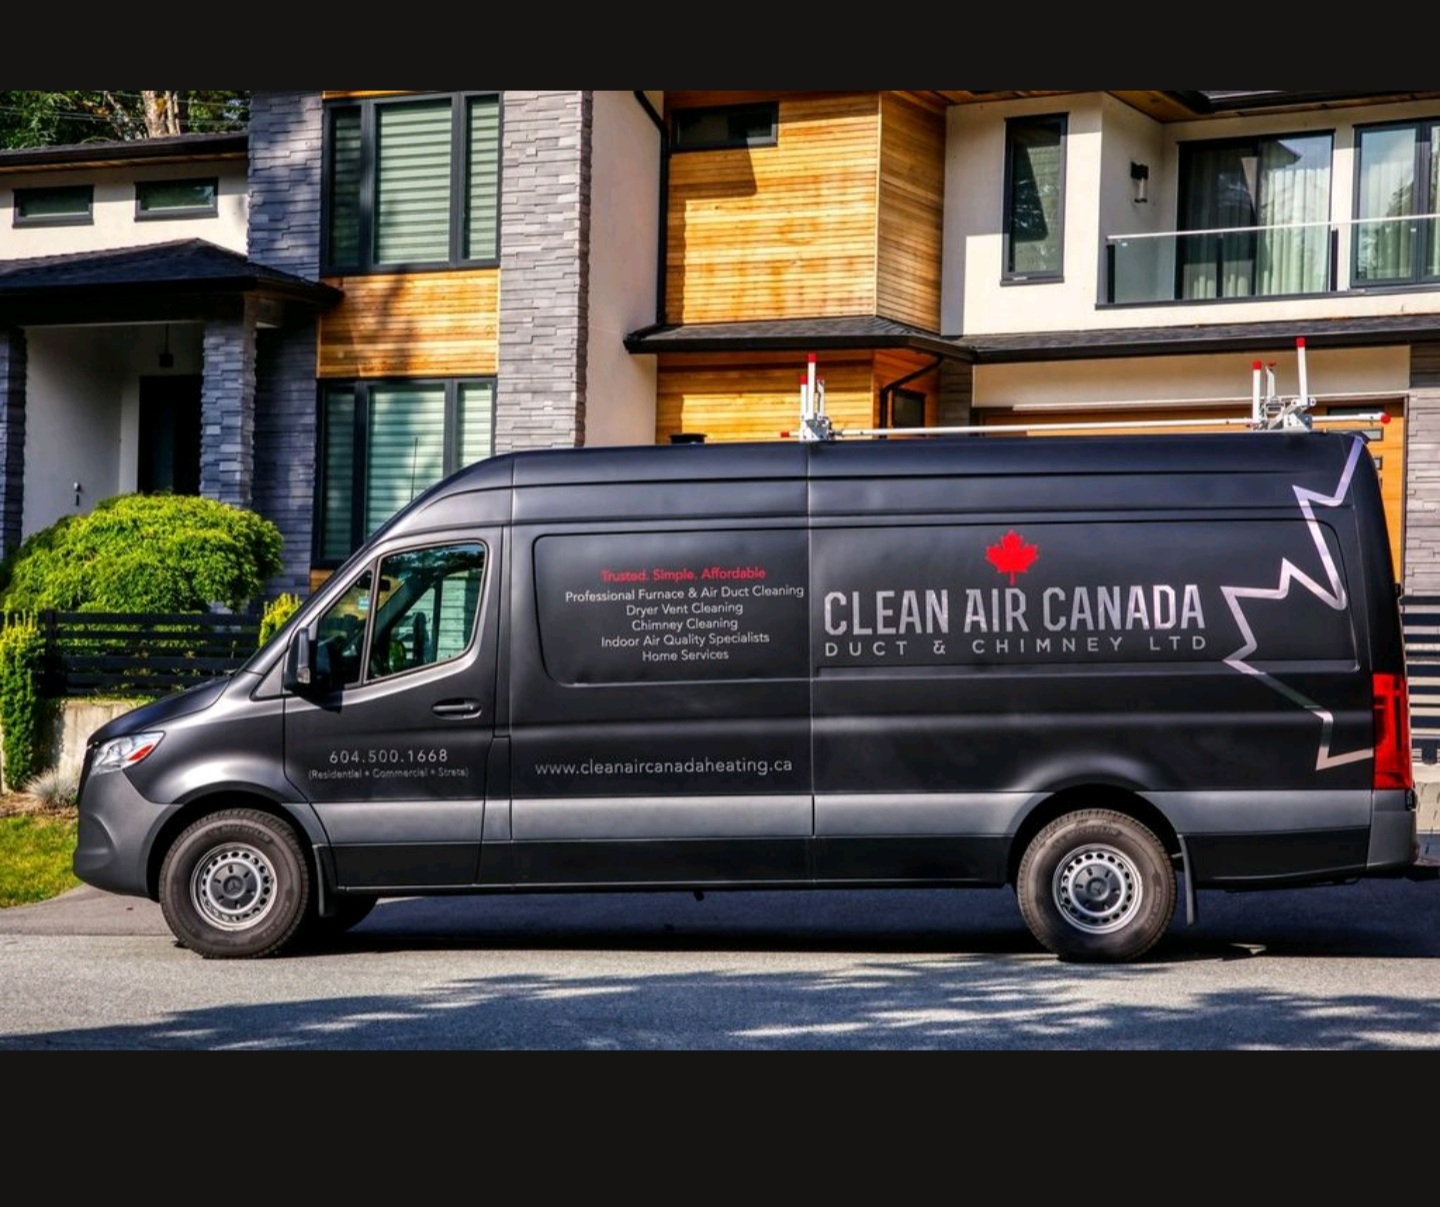 Vancouver's #1 Furnace & Duct Cleaning Professionals